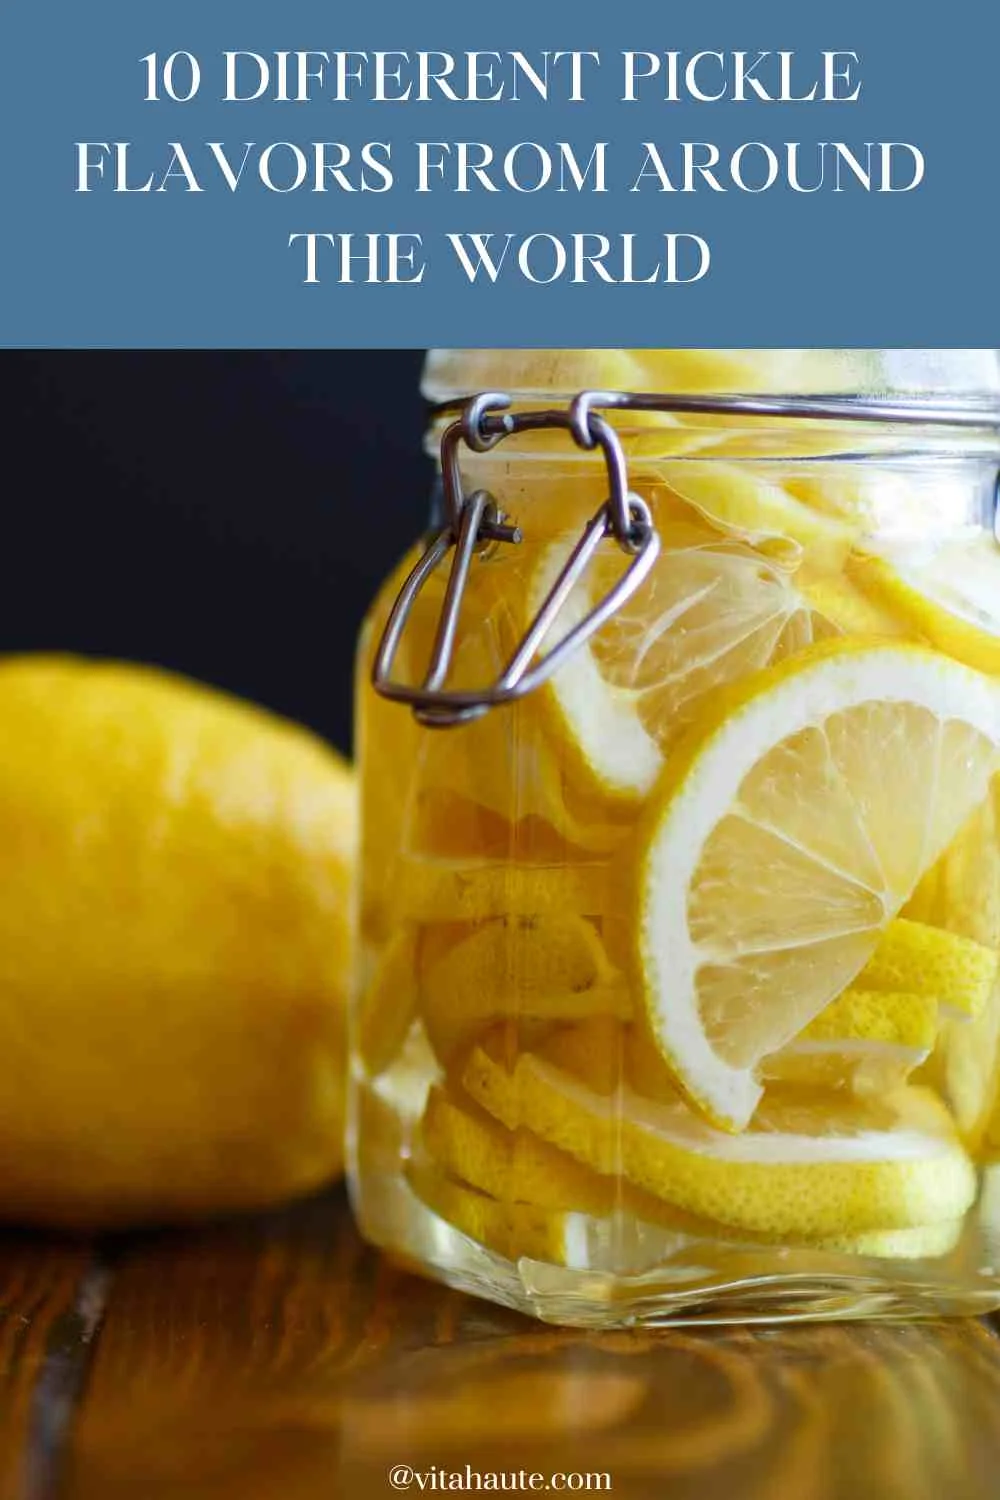 Jars of pickles from around the world